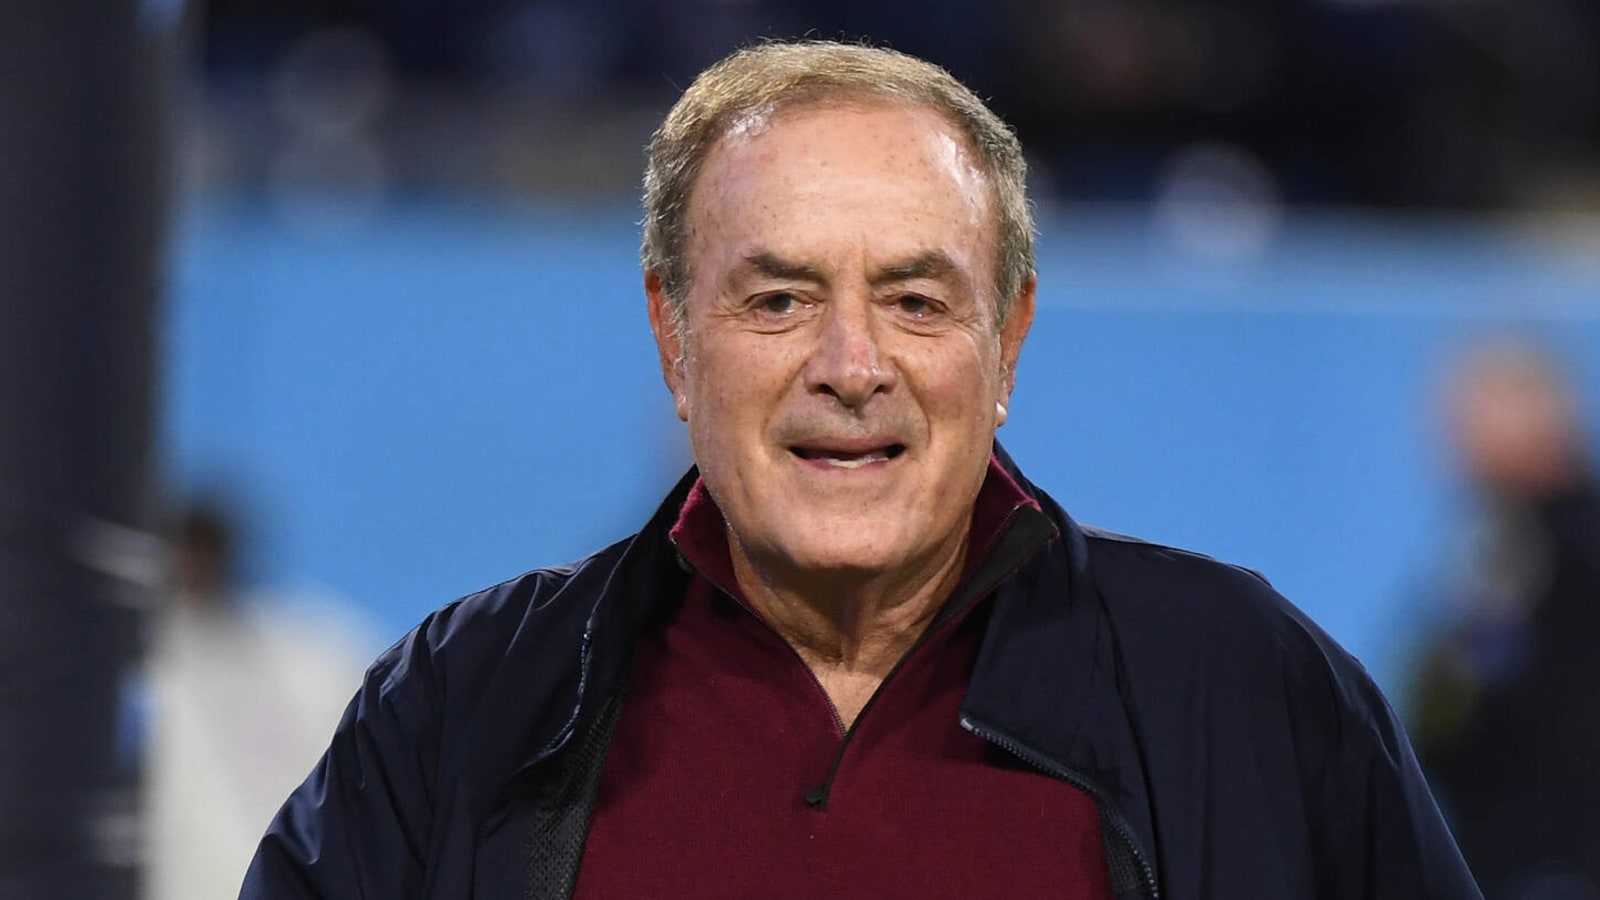 NBC catches Al Michaels ‘off guard’ with playoff decision